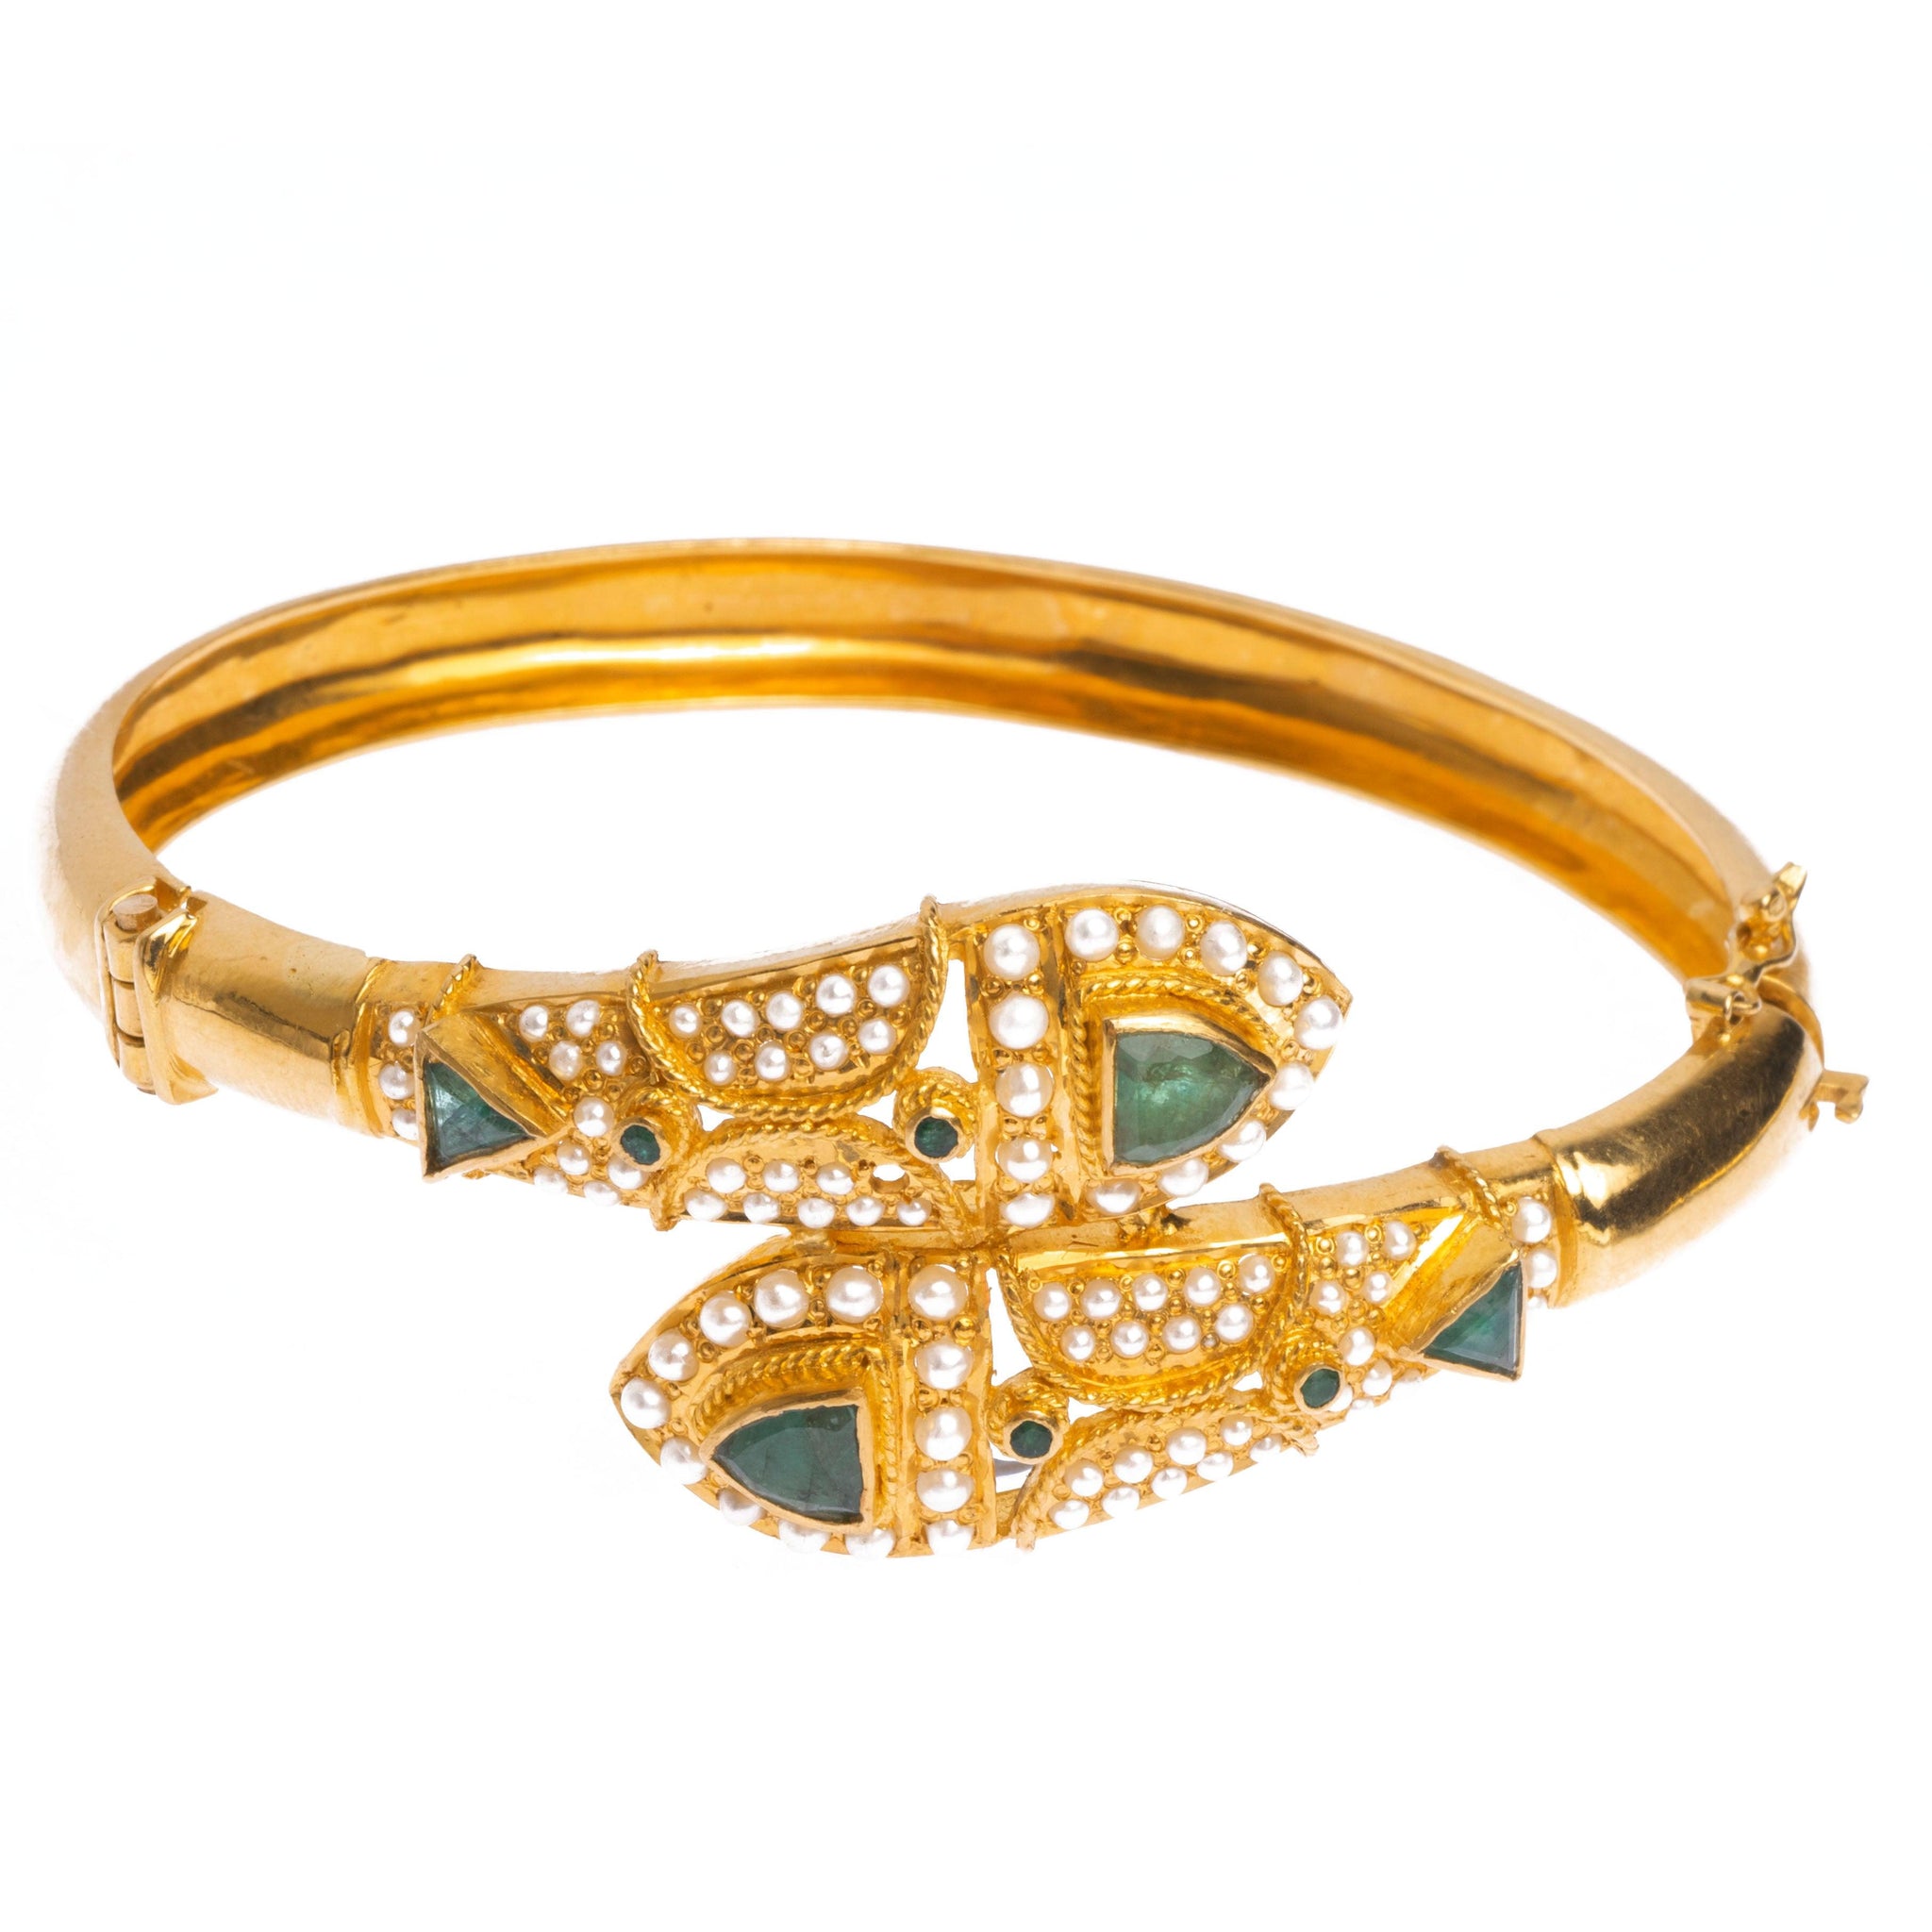 22ct Gold Antiquated Look Openable Bangle set with Green Stones and Cultured Pearls B-8447